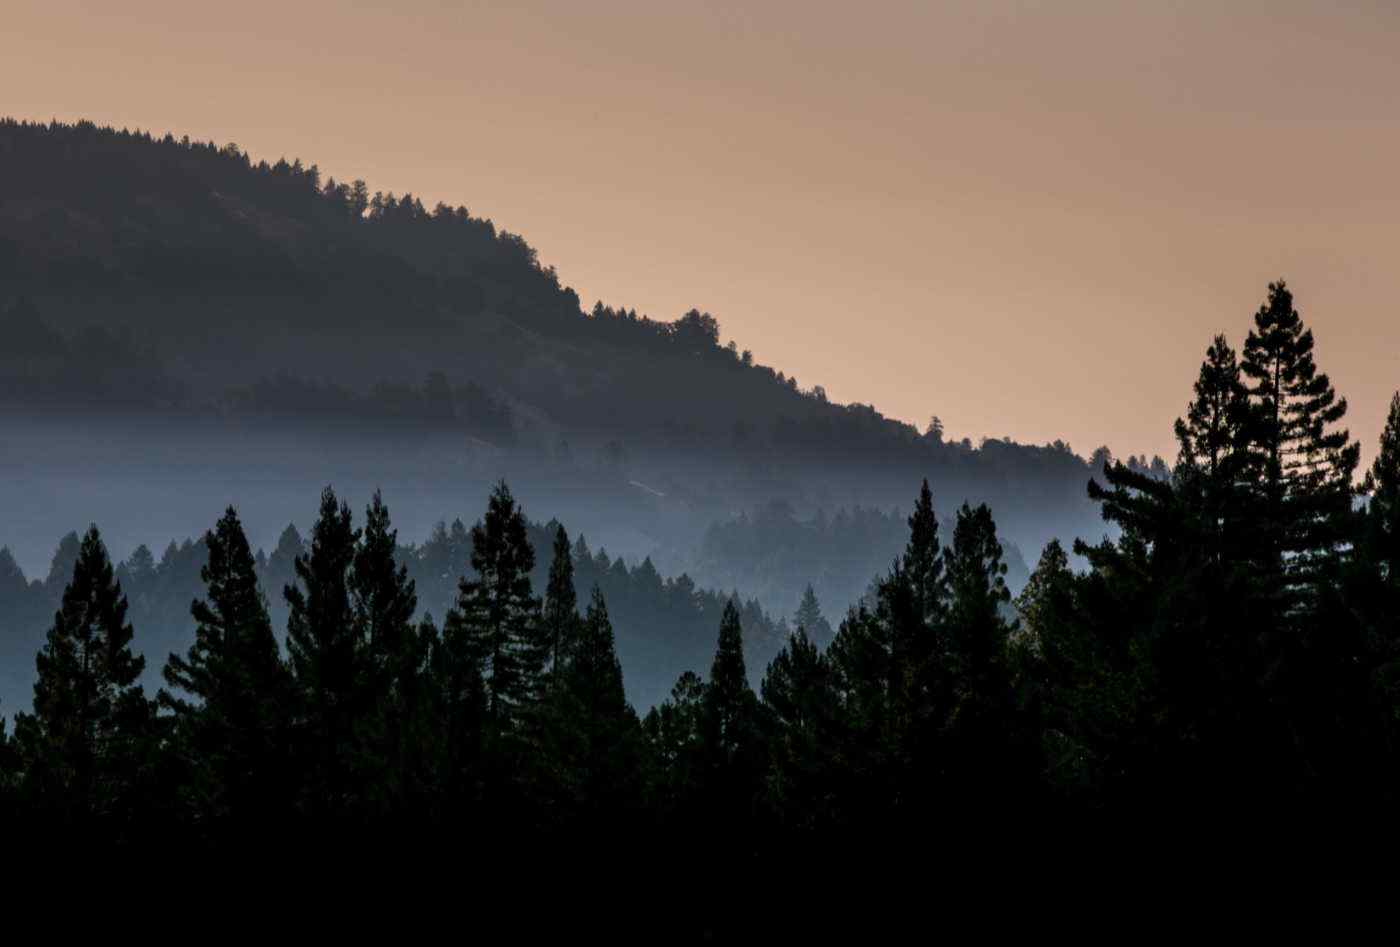 Martinelli winery coastal property late sunset with fog and trees